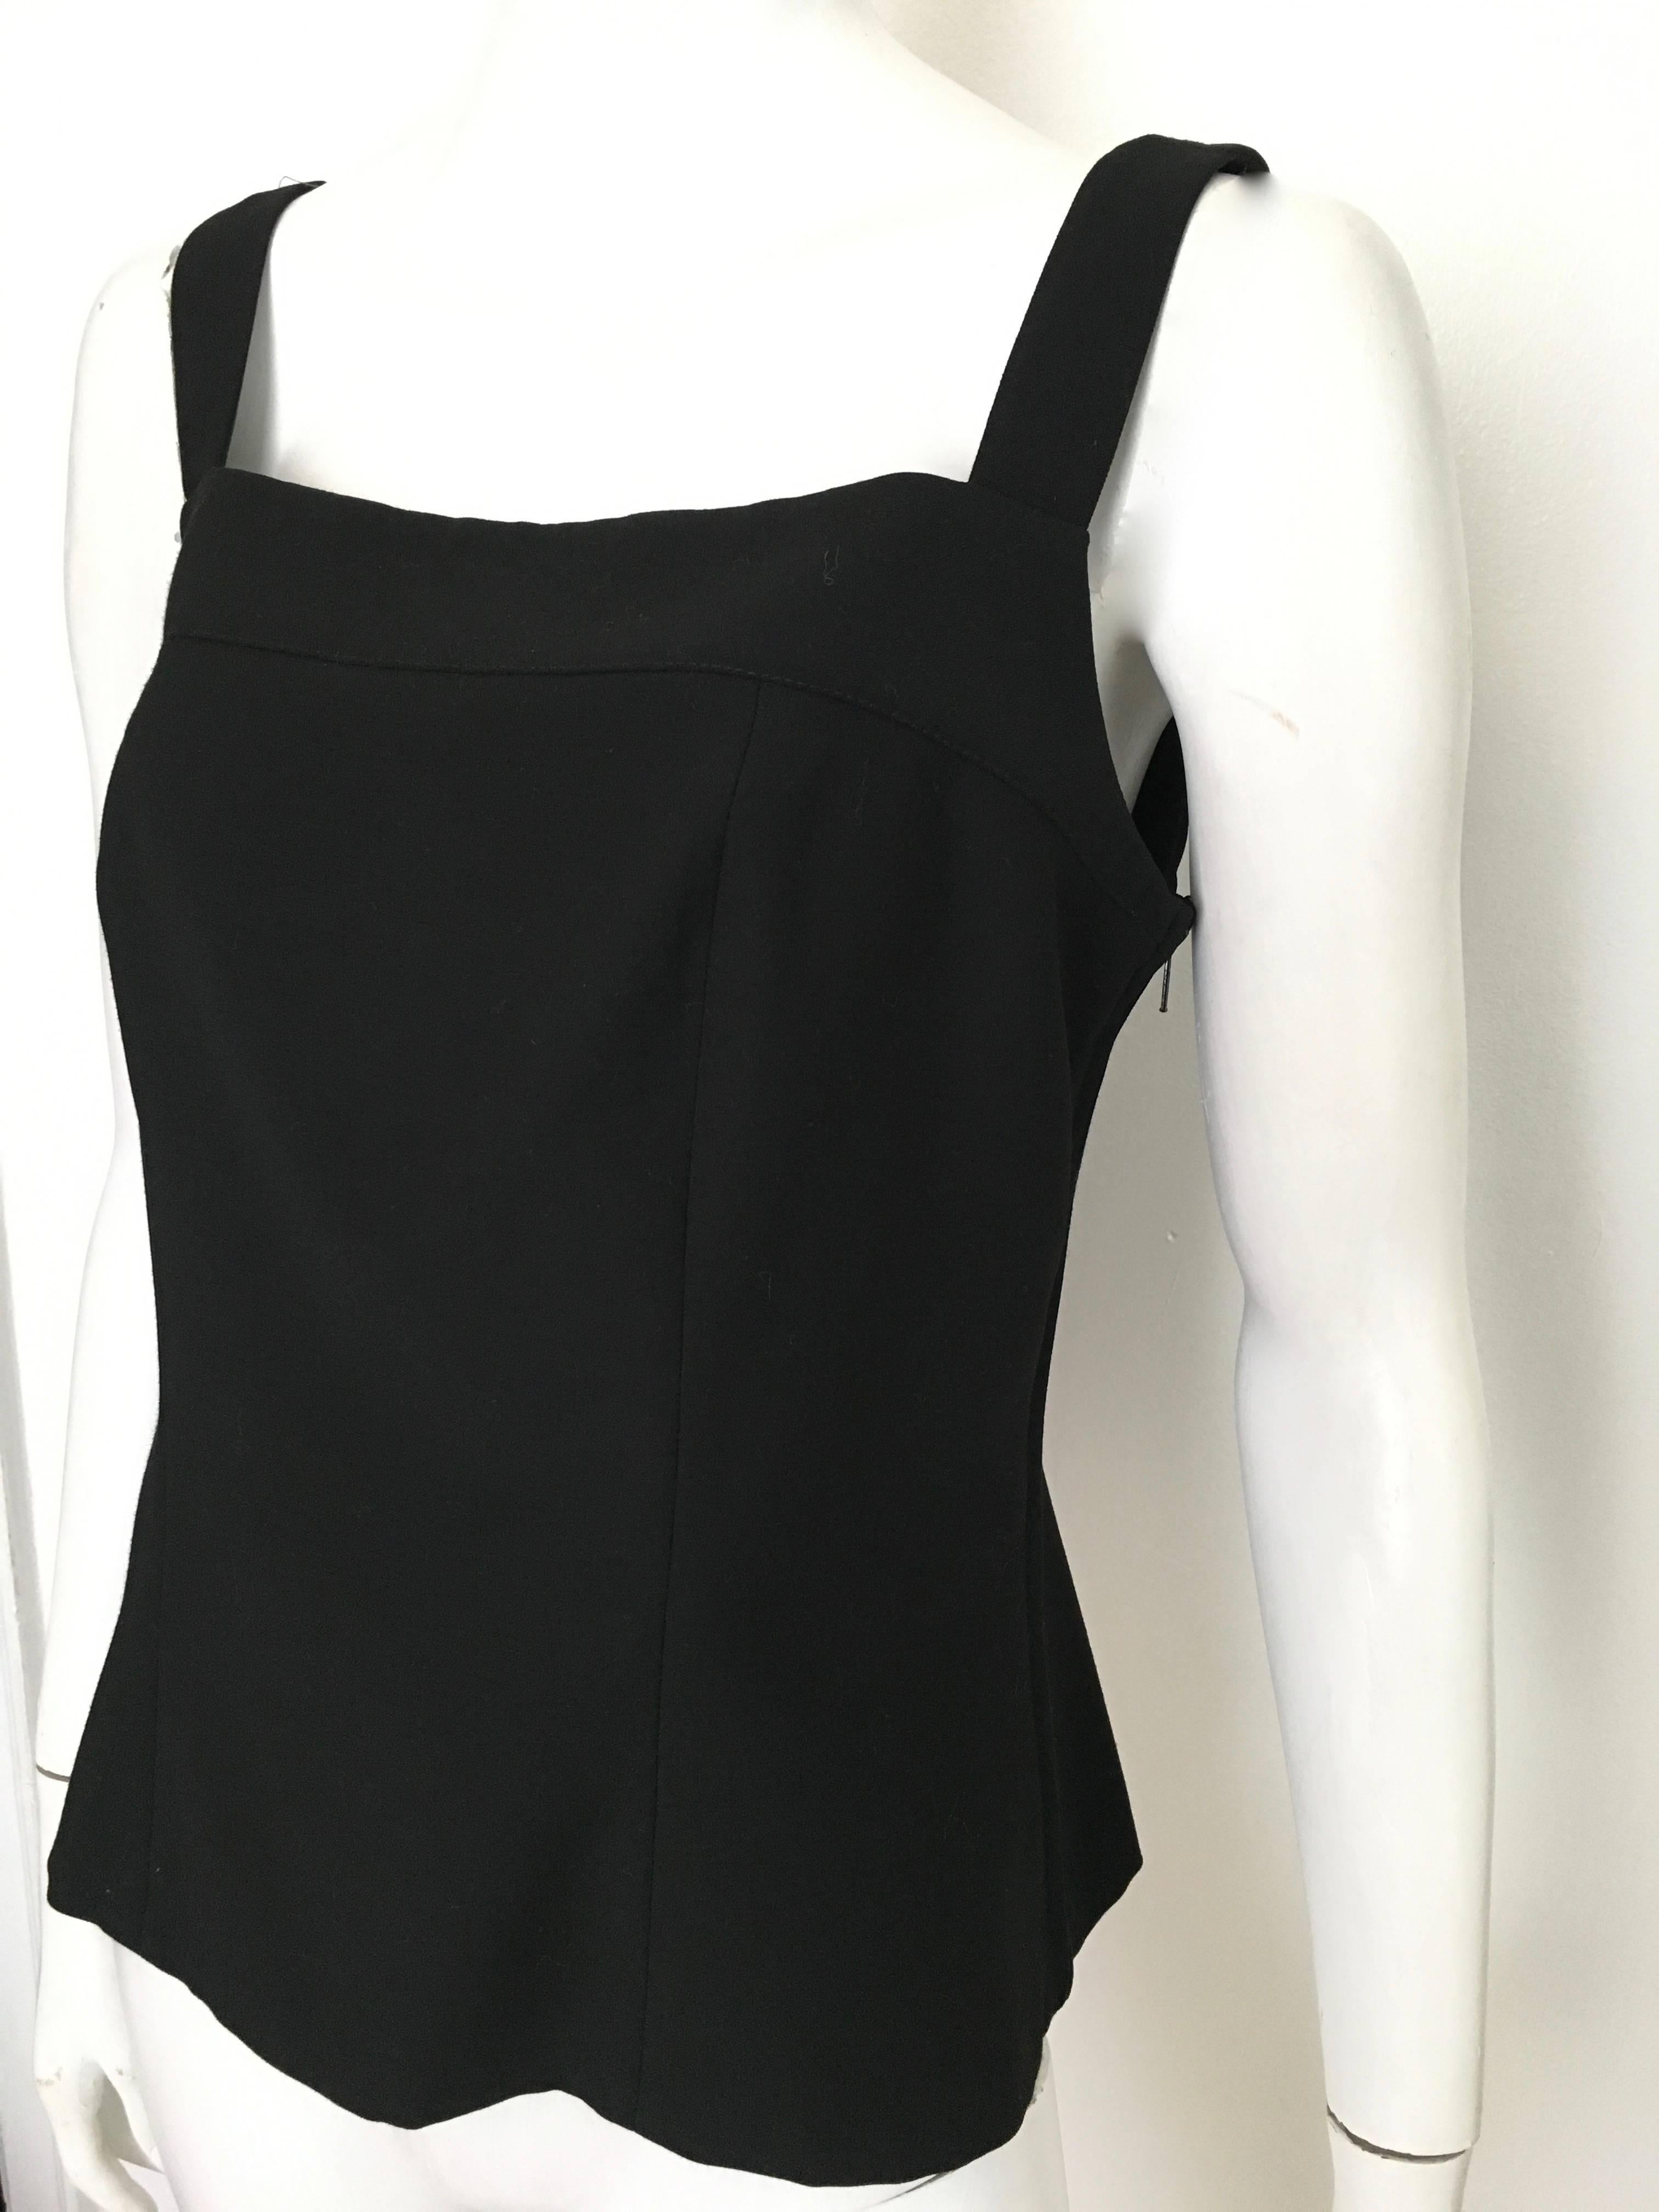 Yves Saint Laurent 1990s black wool camisole is a size 12.  Classic design and a must have for any woman's wardrobe.  Wear this YSL top with your Chanel pants and your Dior heels or with your favorite pair of denim jeans.  Either way you wear this